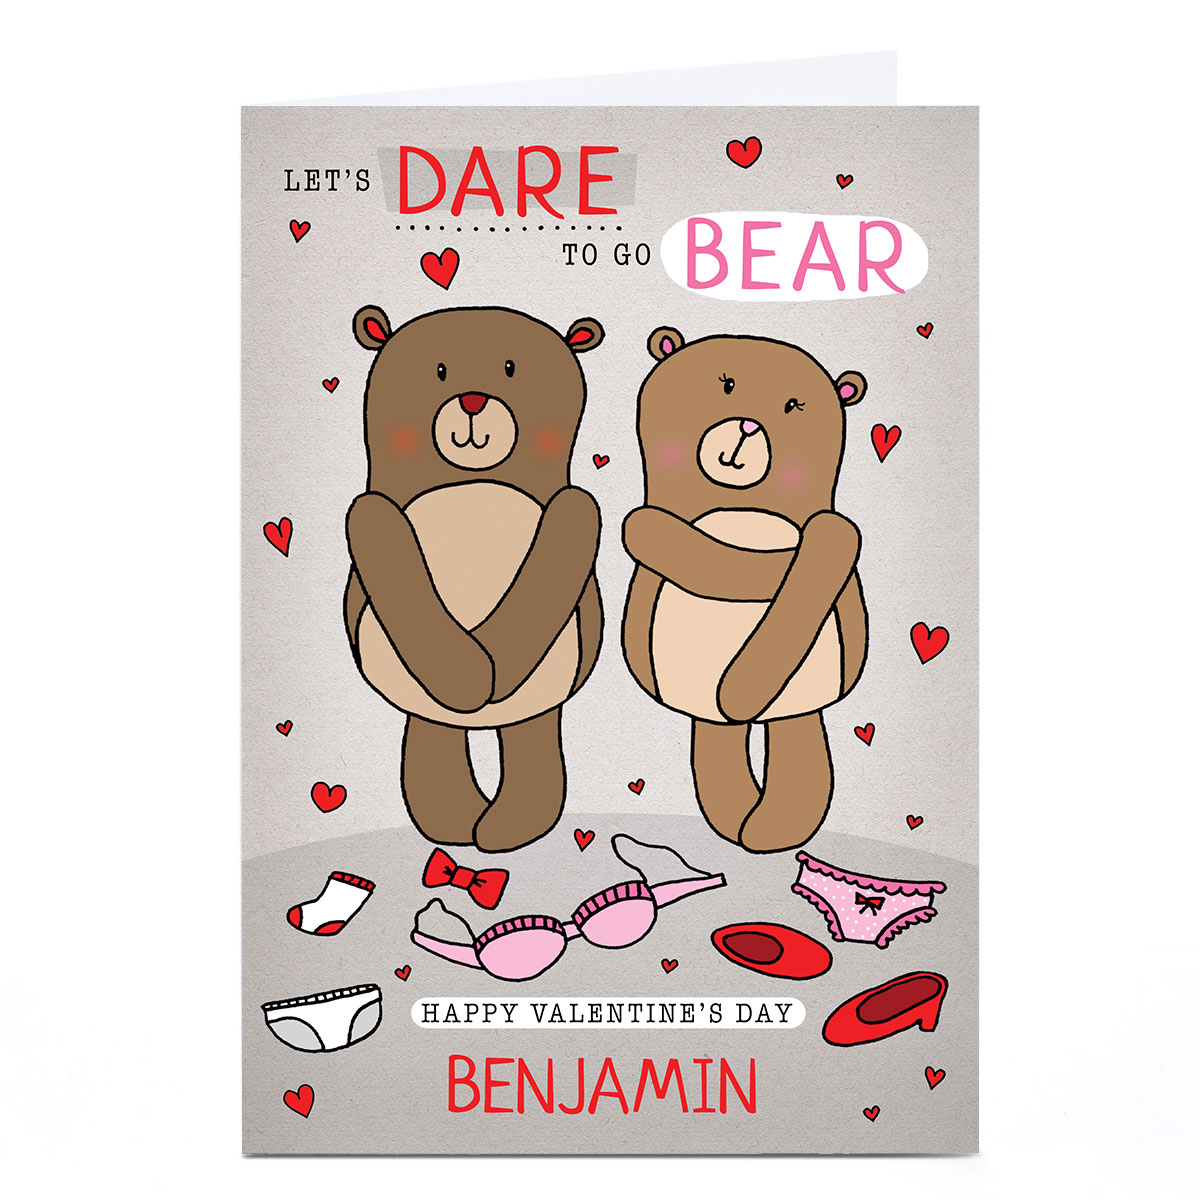 Buy Personalised Valentines Day Card Dare To Go Bear For Gbp 179 Card Factory Uk